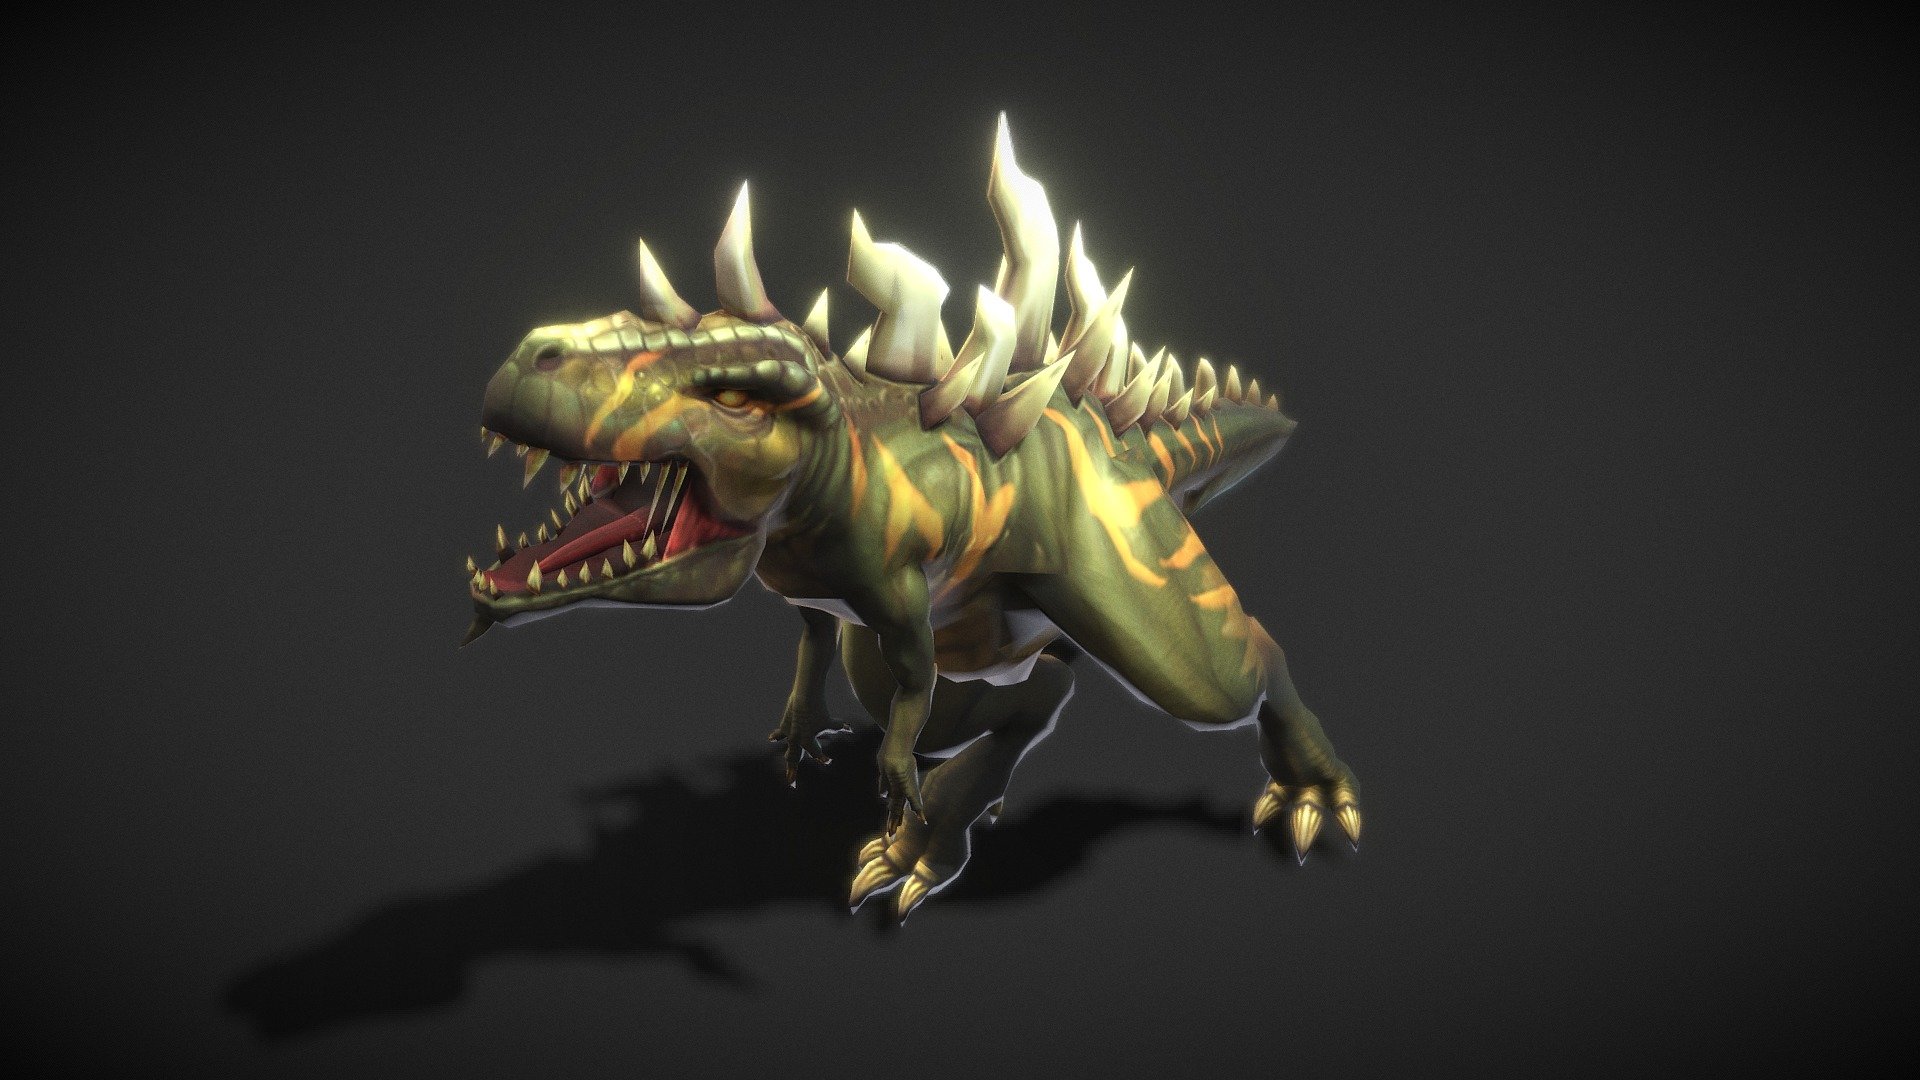 Verts: 3325
Tris: 4200
Texture: 512X512 X 1

Animation List :
Animation type_Generic (Not Humanoid)
idle, walk, attack, active, passive, dead - Fantasy Chess RPG Character - Trex - 3D model by momomo (@F-unit) 3d model